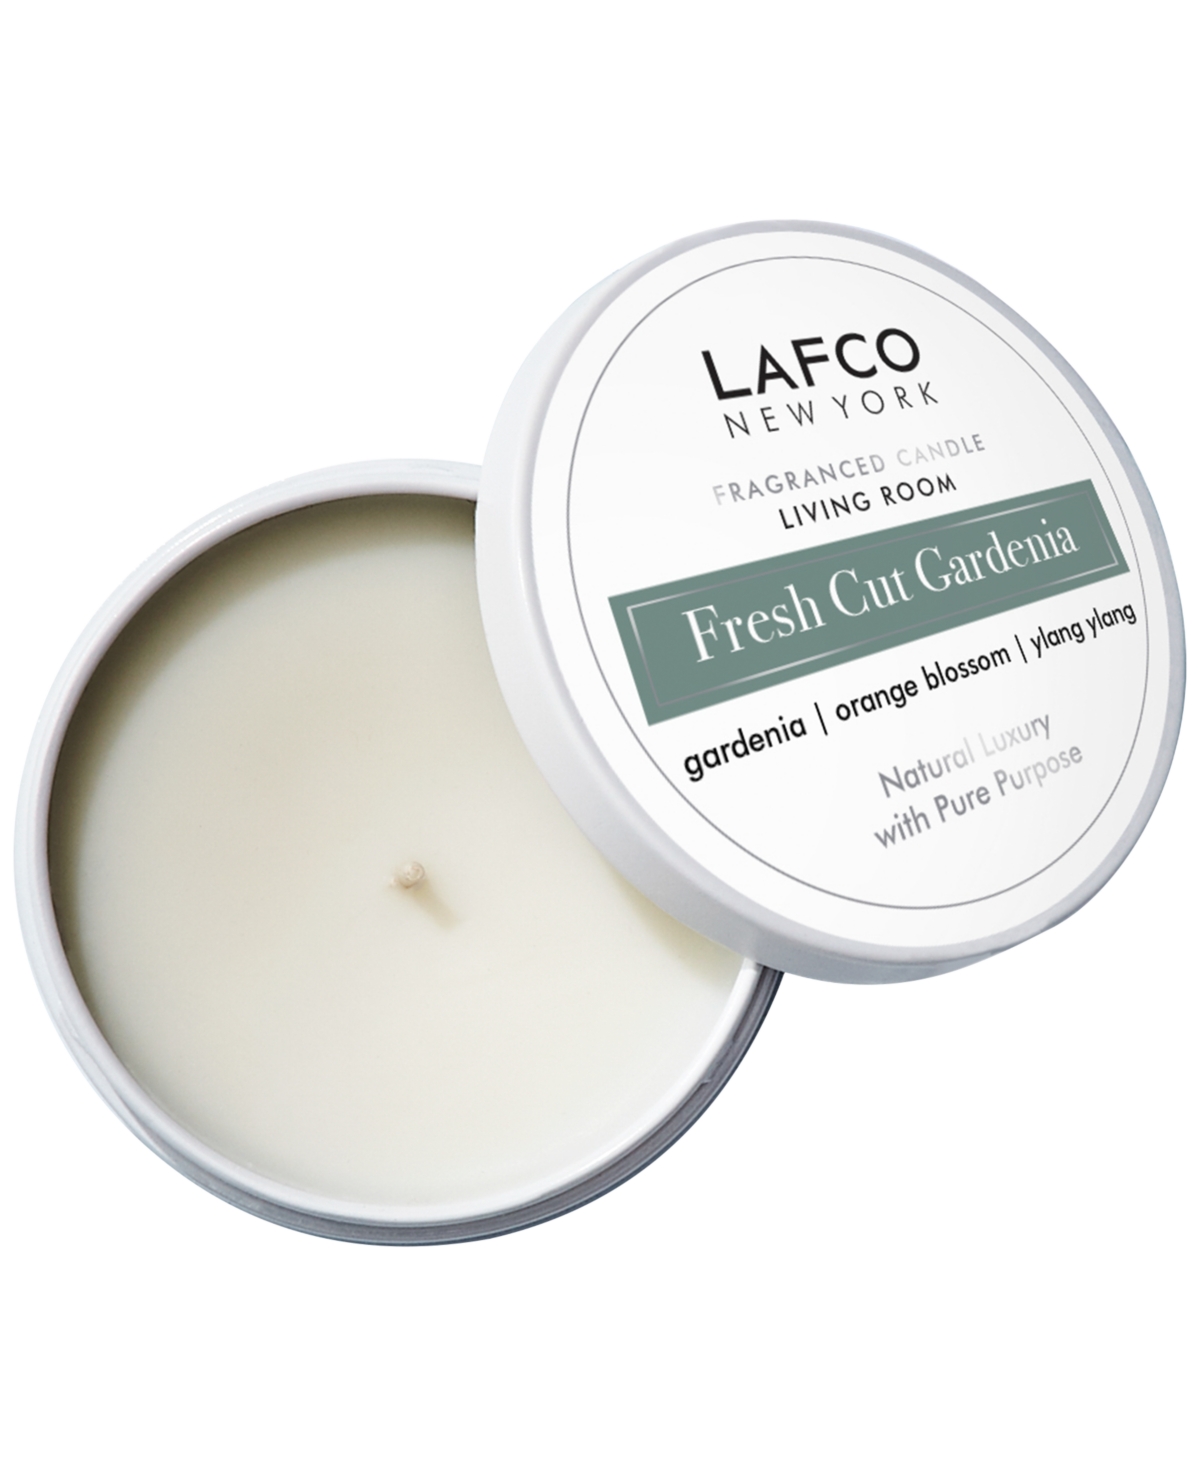 Lafco New York Fresh Cut Gardenia Living Room Travel Candle, 4-oz. In White